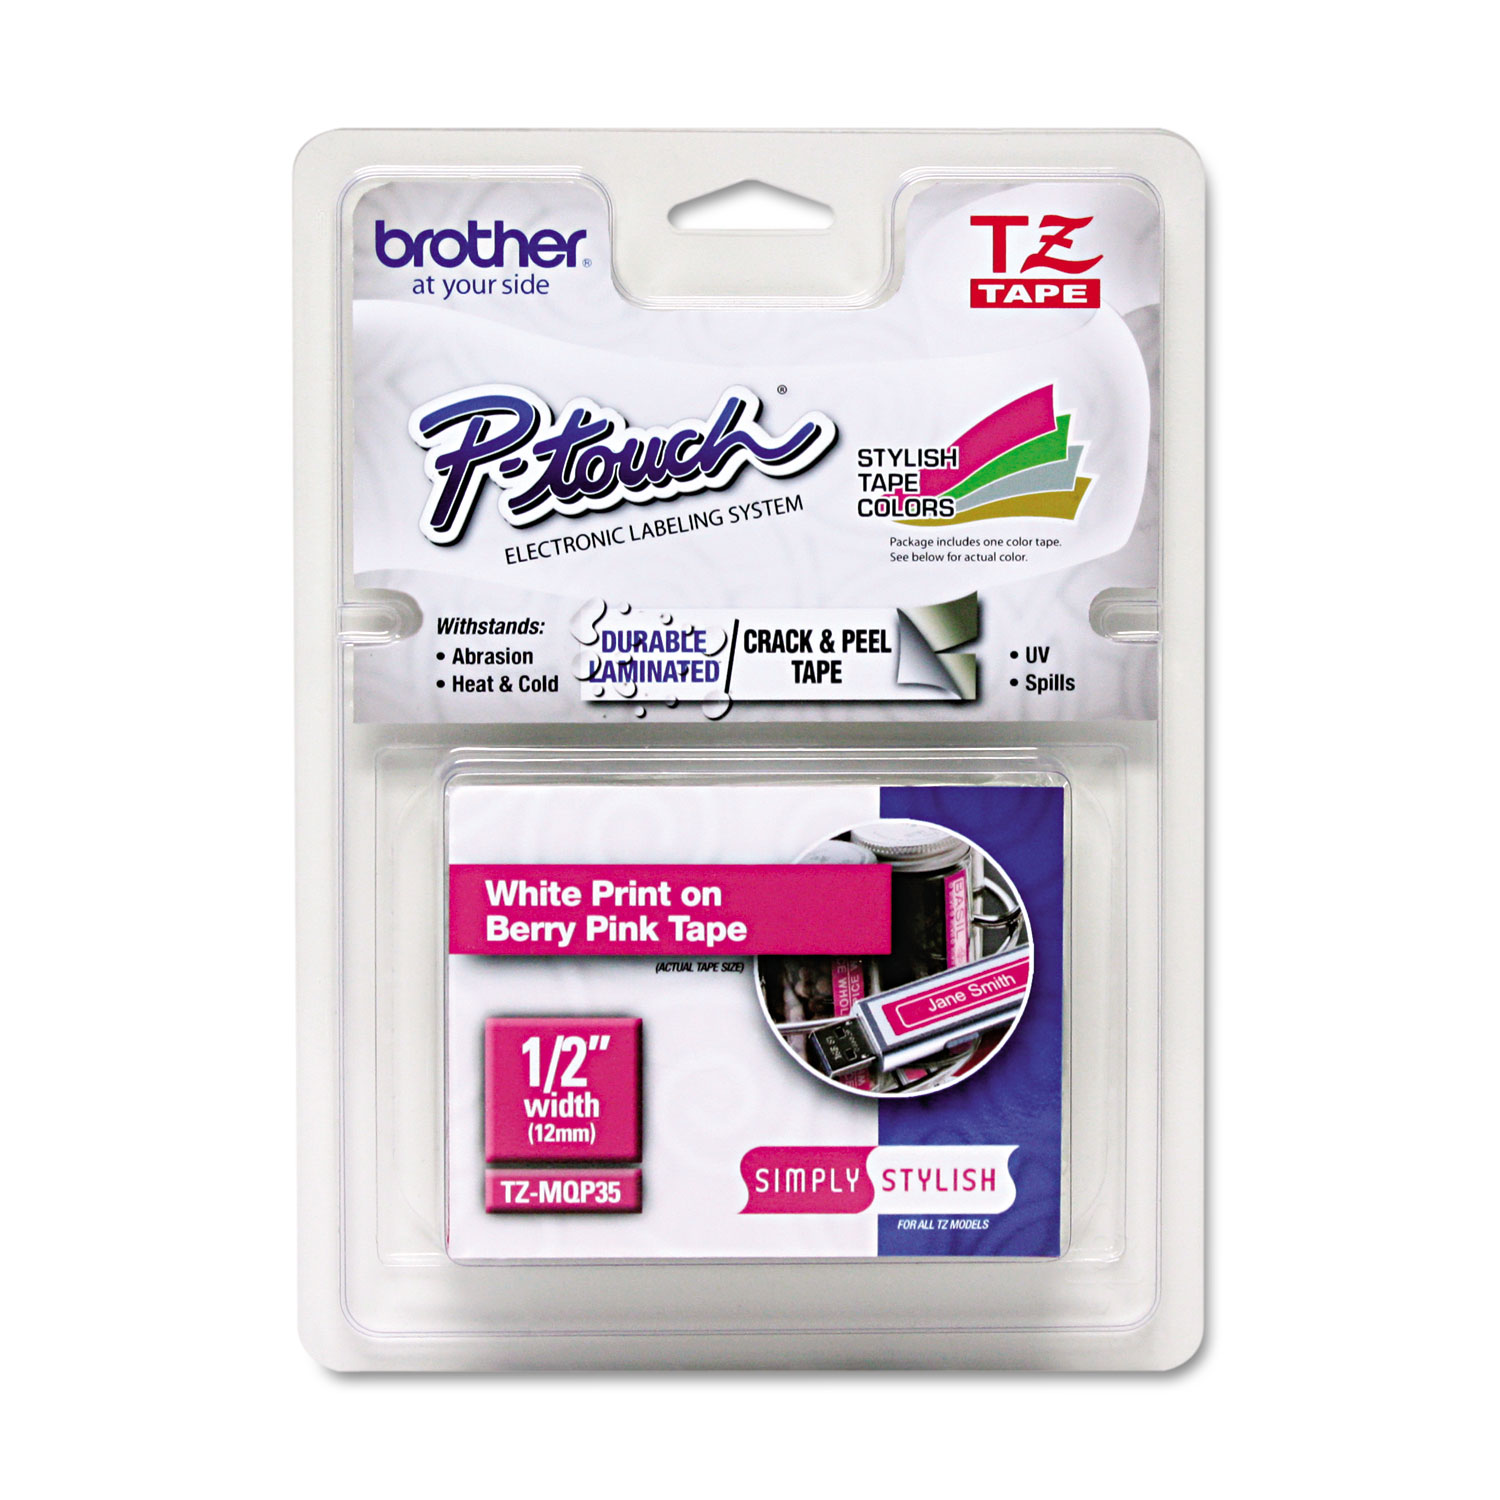  Brother P-Touch TZEMQP35 TZ Standard Adhesive Laminated Labeling Tape, 0.47 x 16.4 ft, White/Berry Pink (BRTTZEMQP35) 